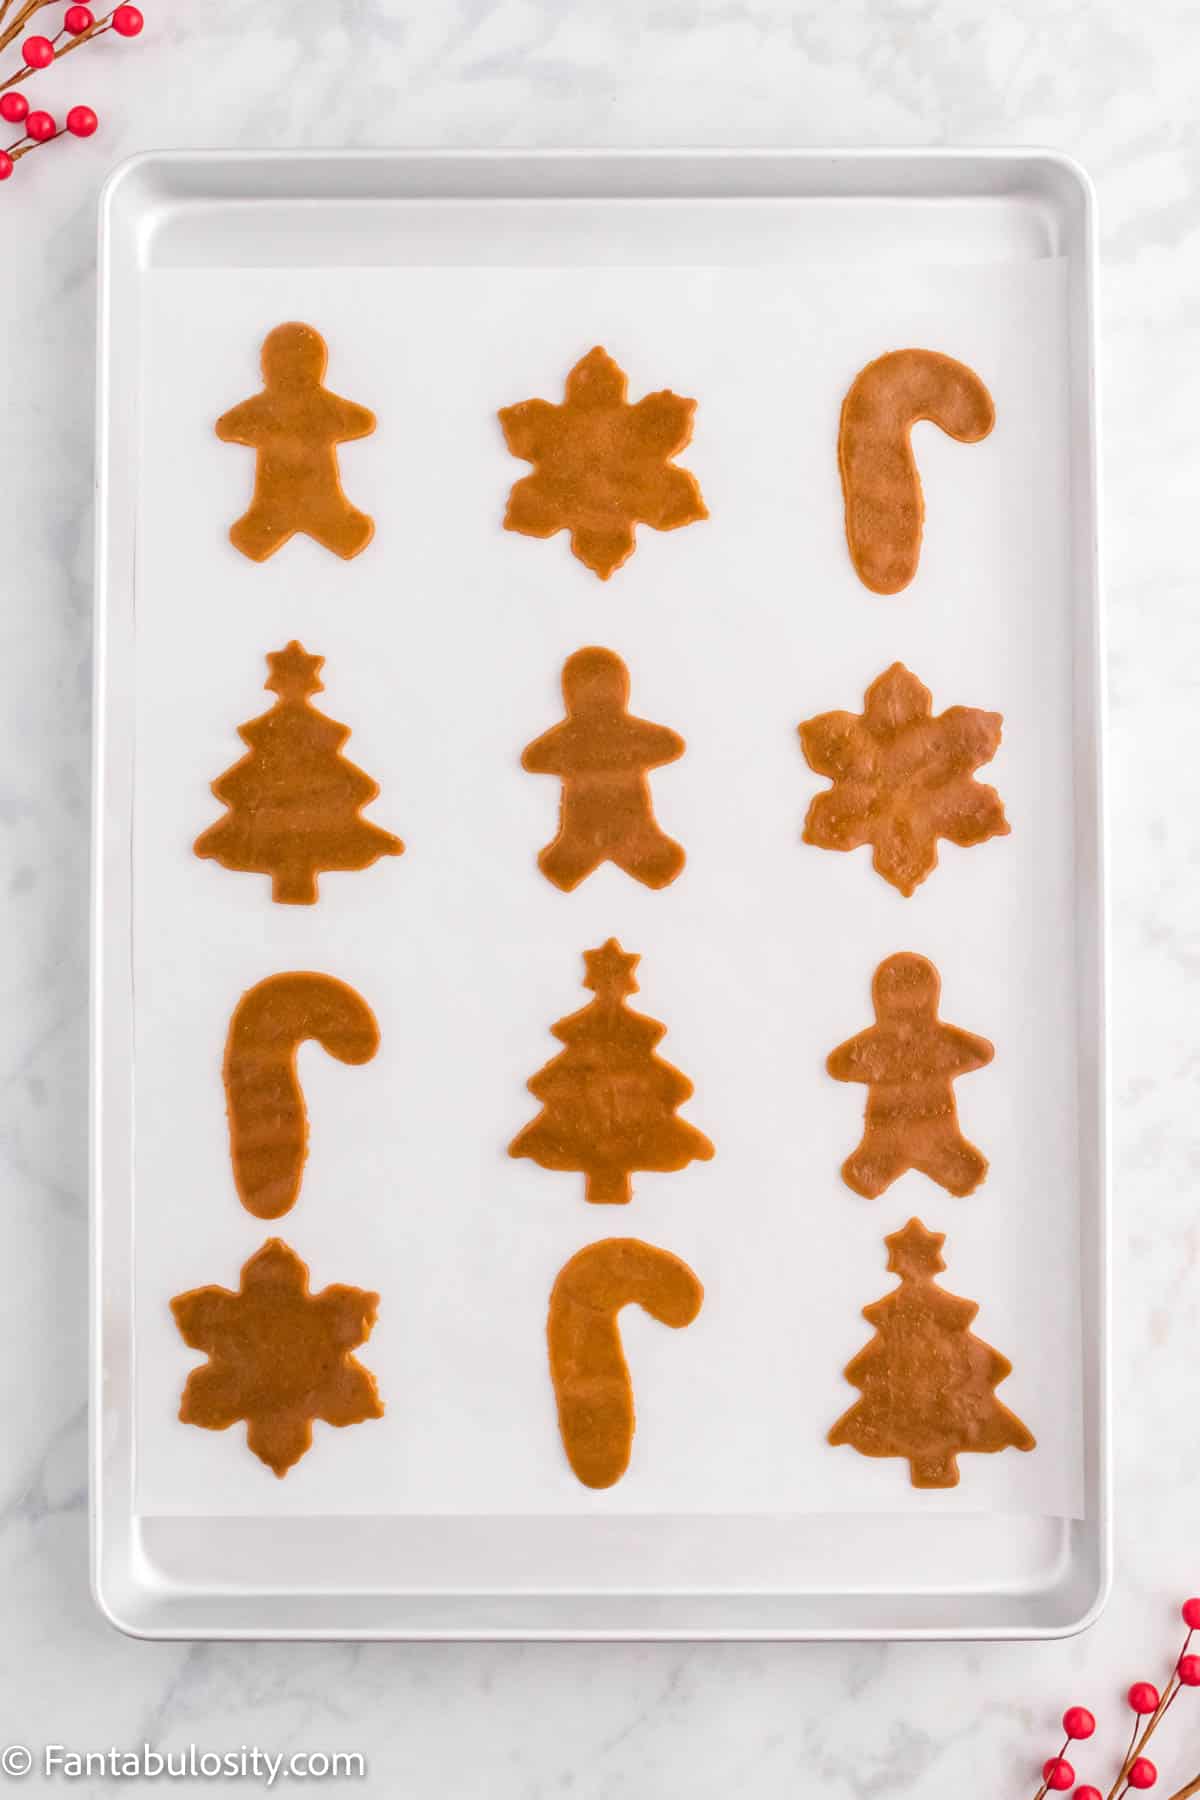 A baking sheet lined with parchment paper holds 12 cut out gingerbread cookies ready to be baked